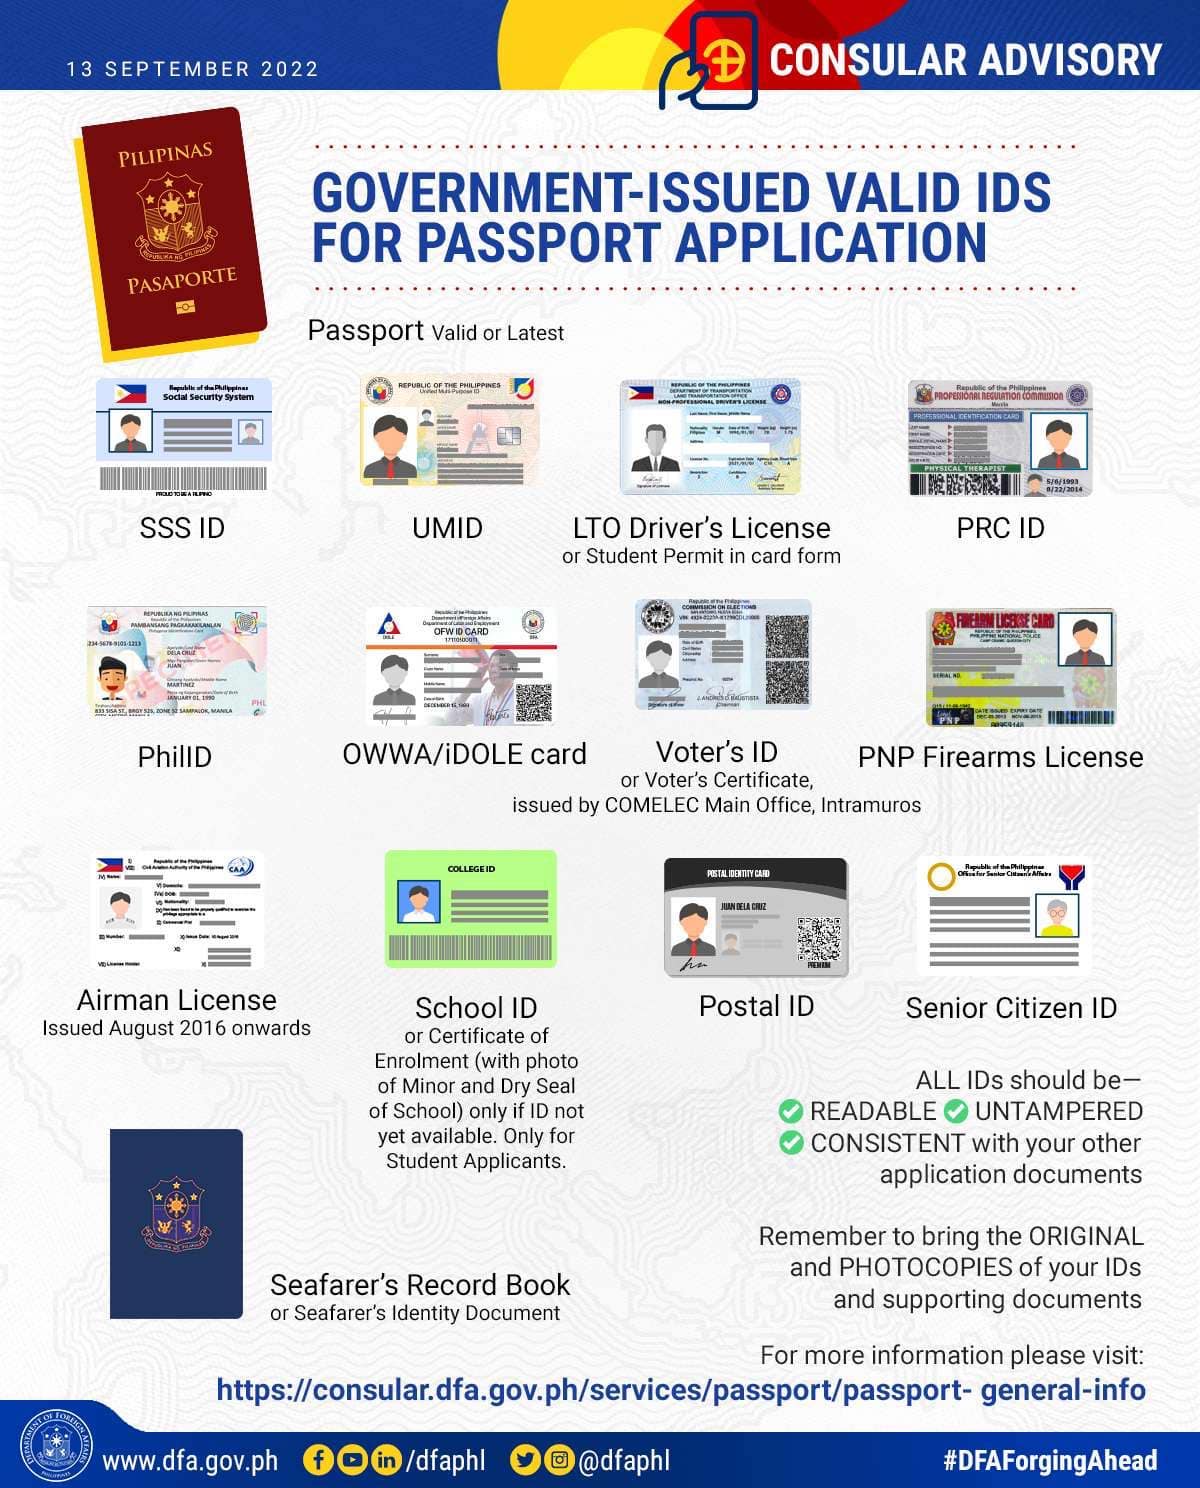 List of valid IDs for Philippine passport applications and renewals